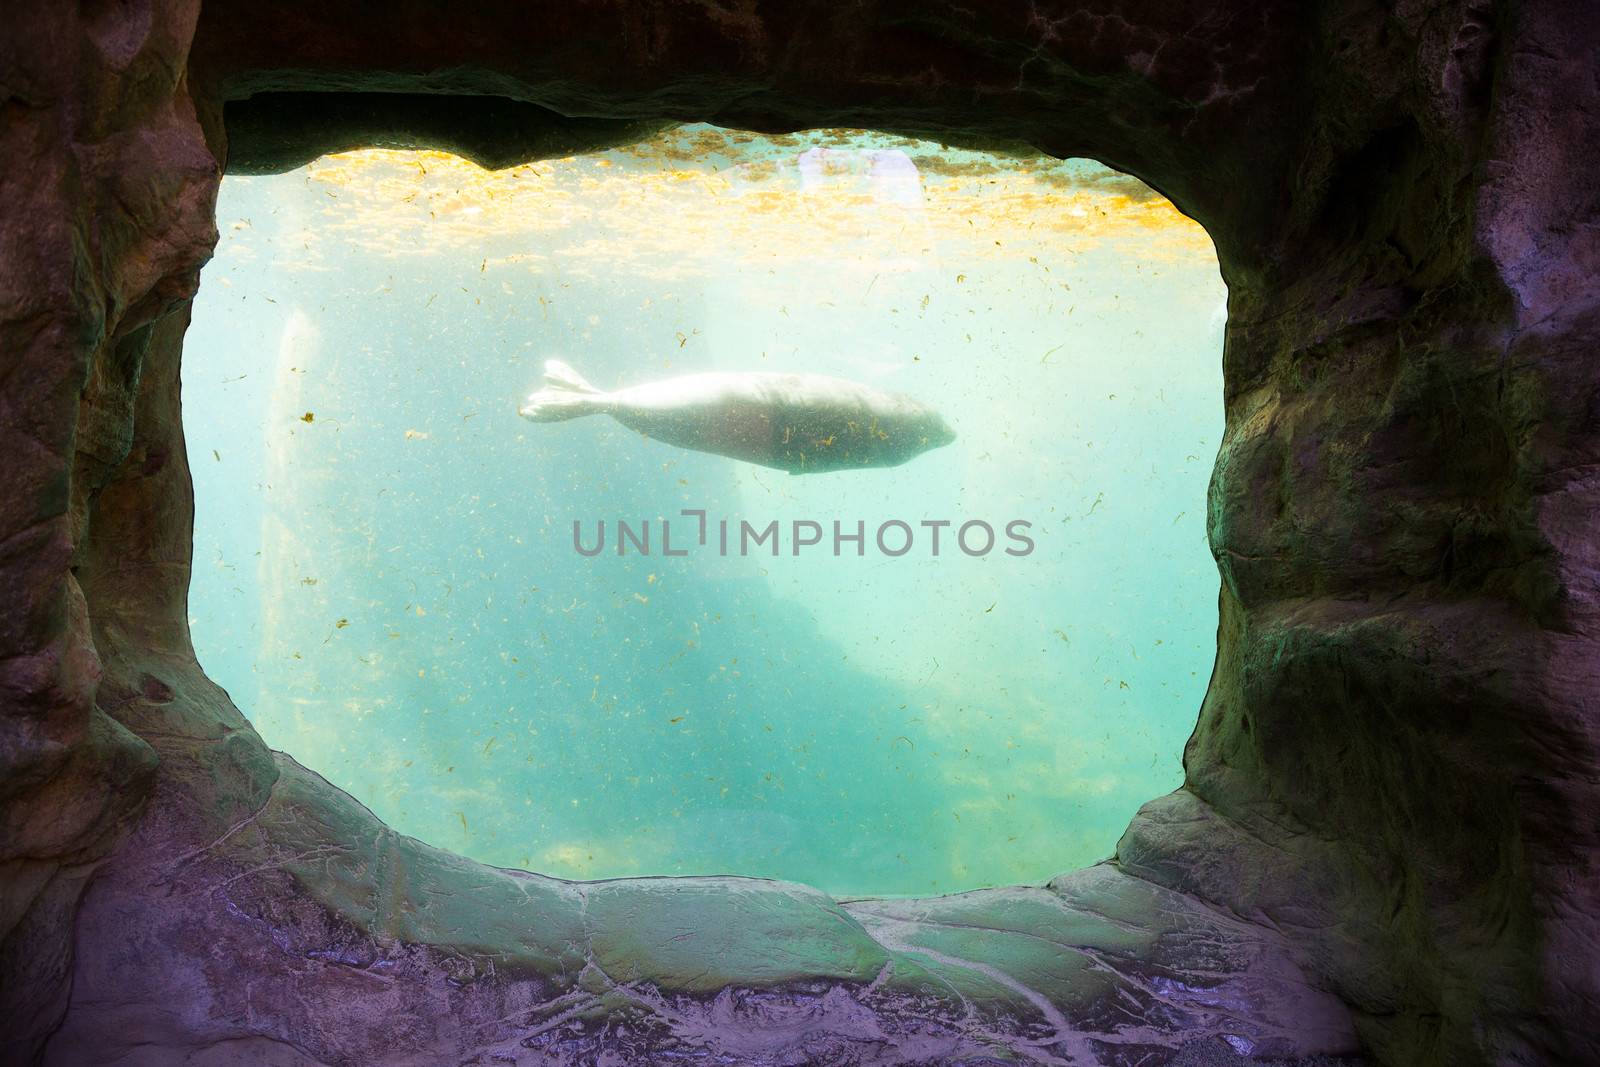 A seal swims by the glass of this aquarium tank at a zoo, calm and peaceful in the dirty tank of water.